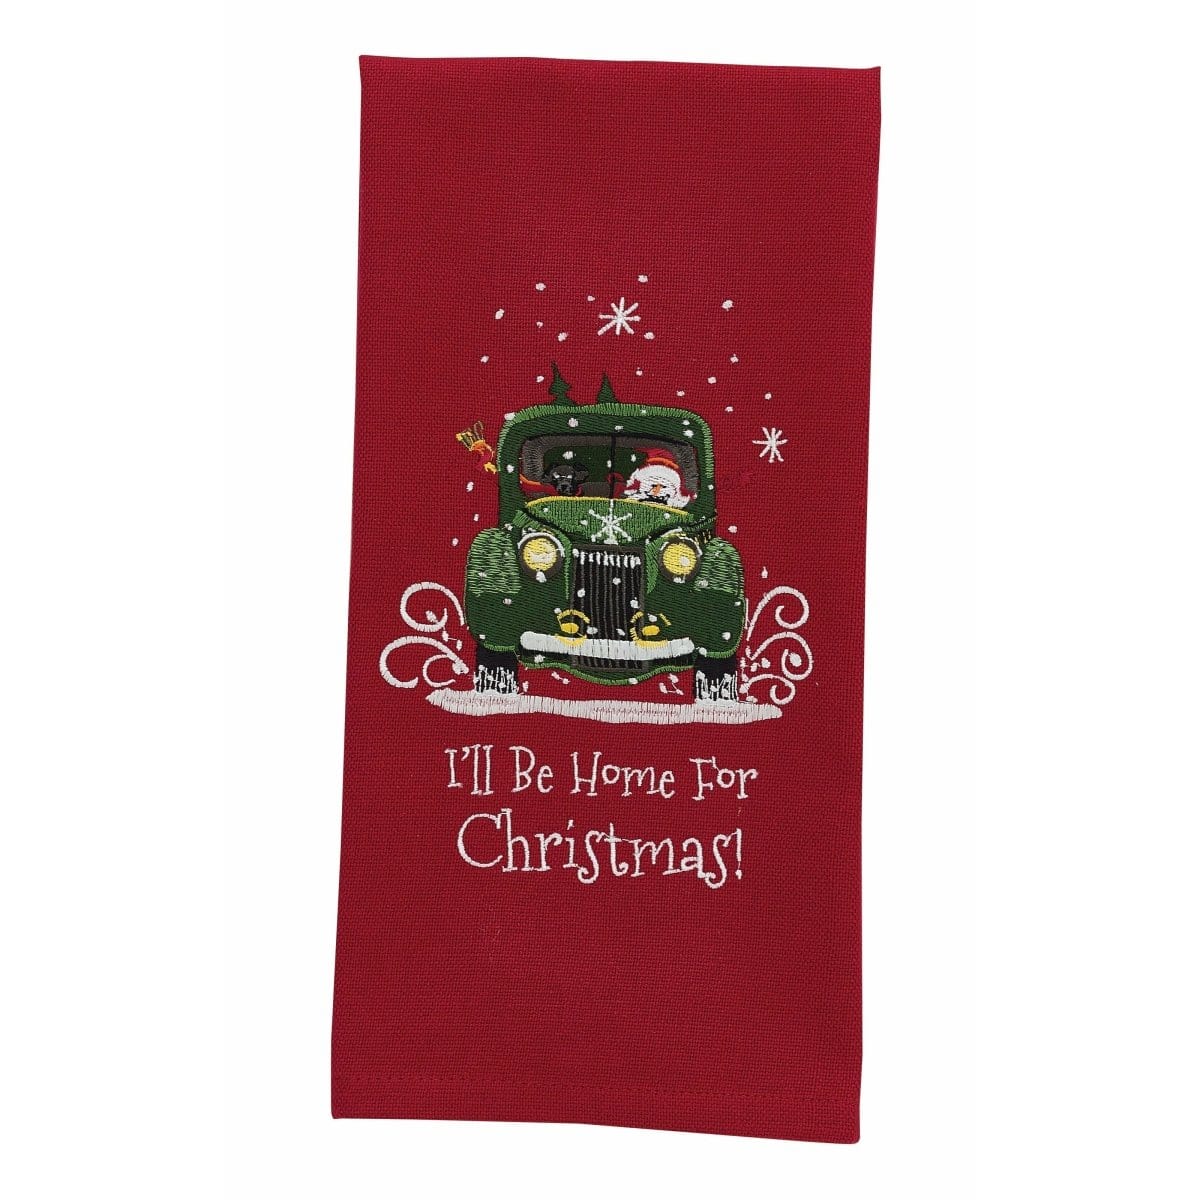 I'll be home for christmas Decorative Towel-Park Designs-The Village Merchant